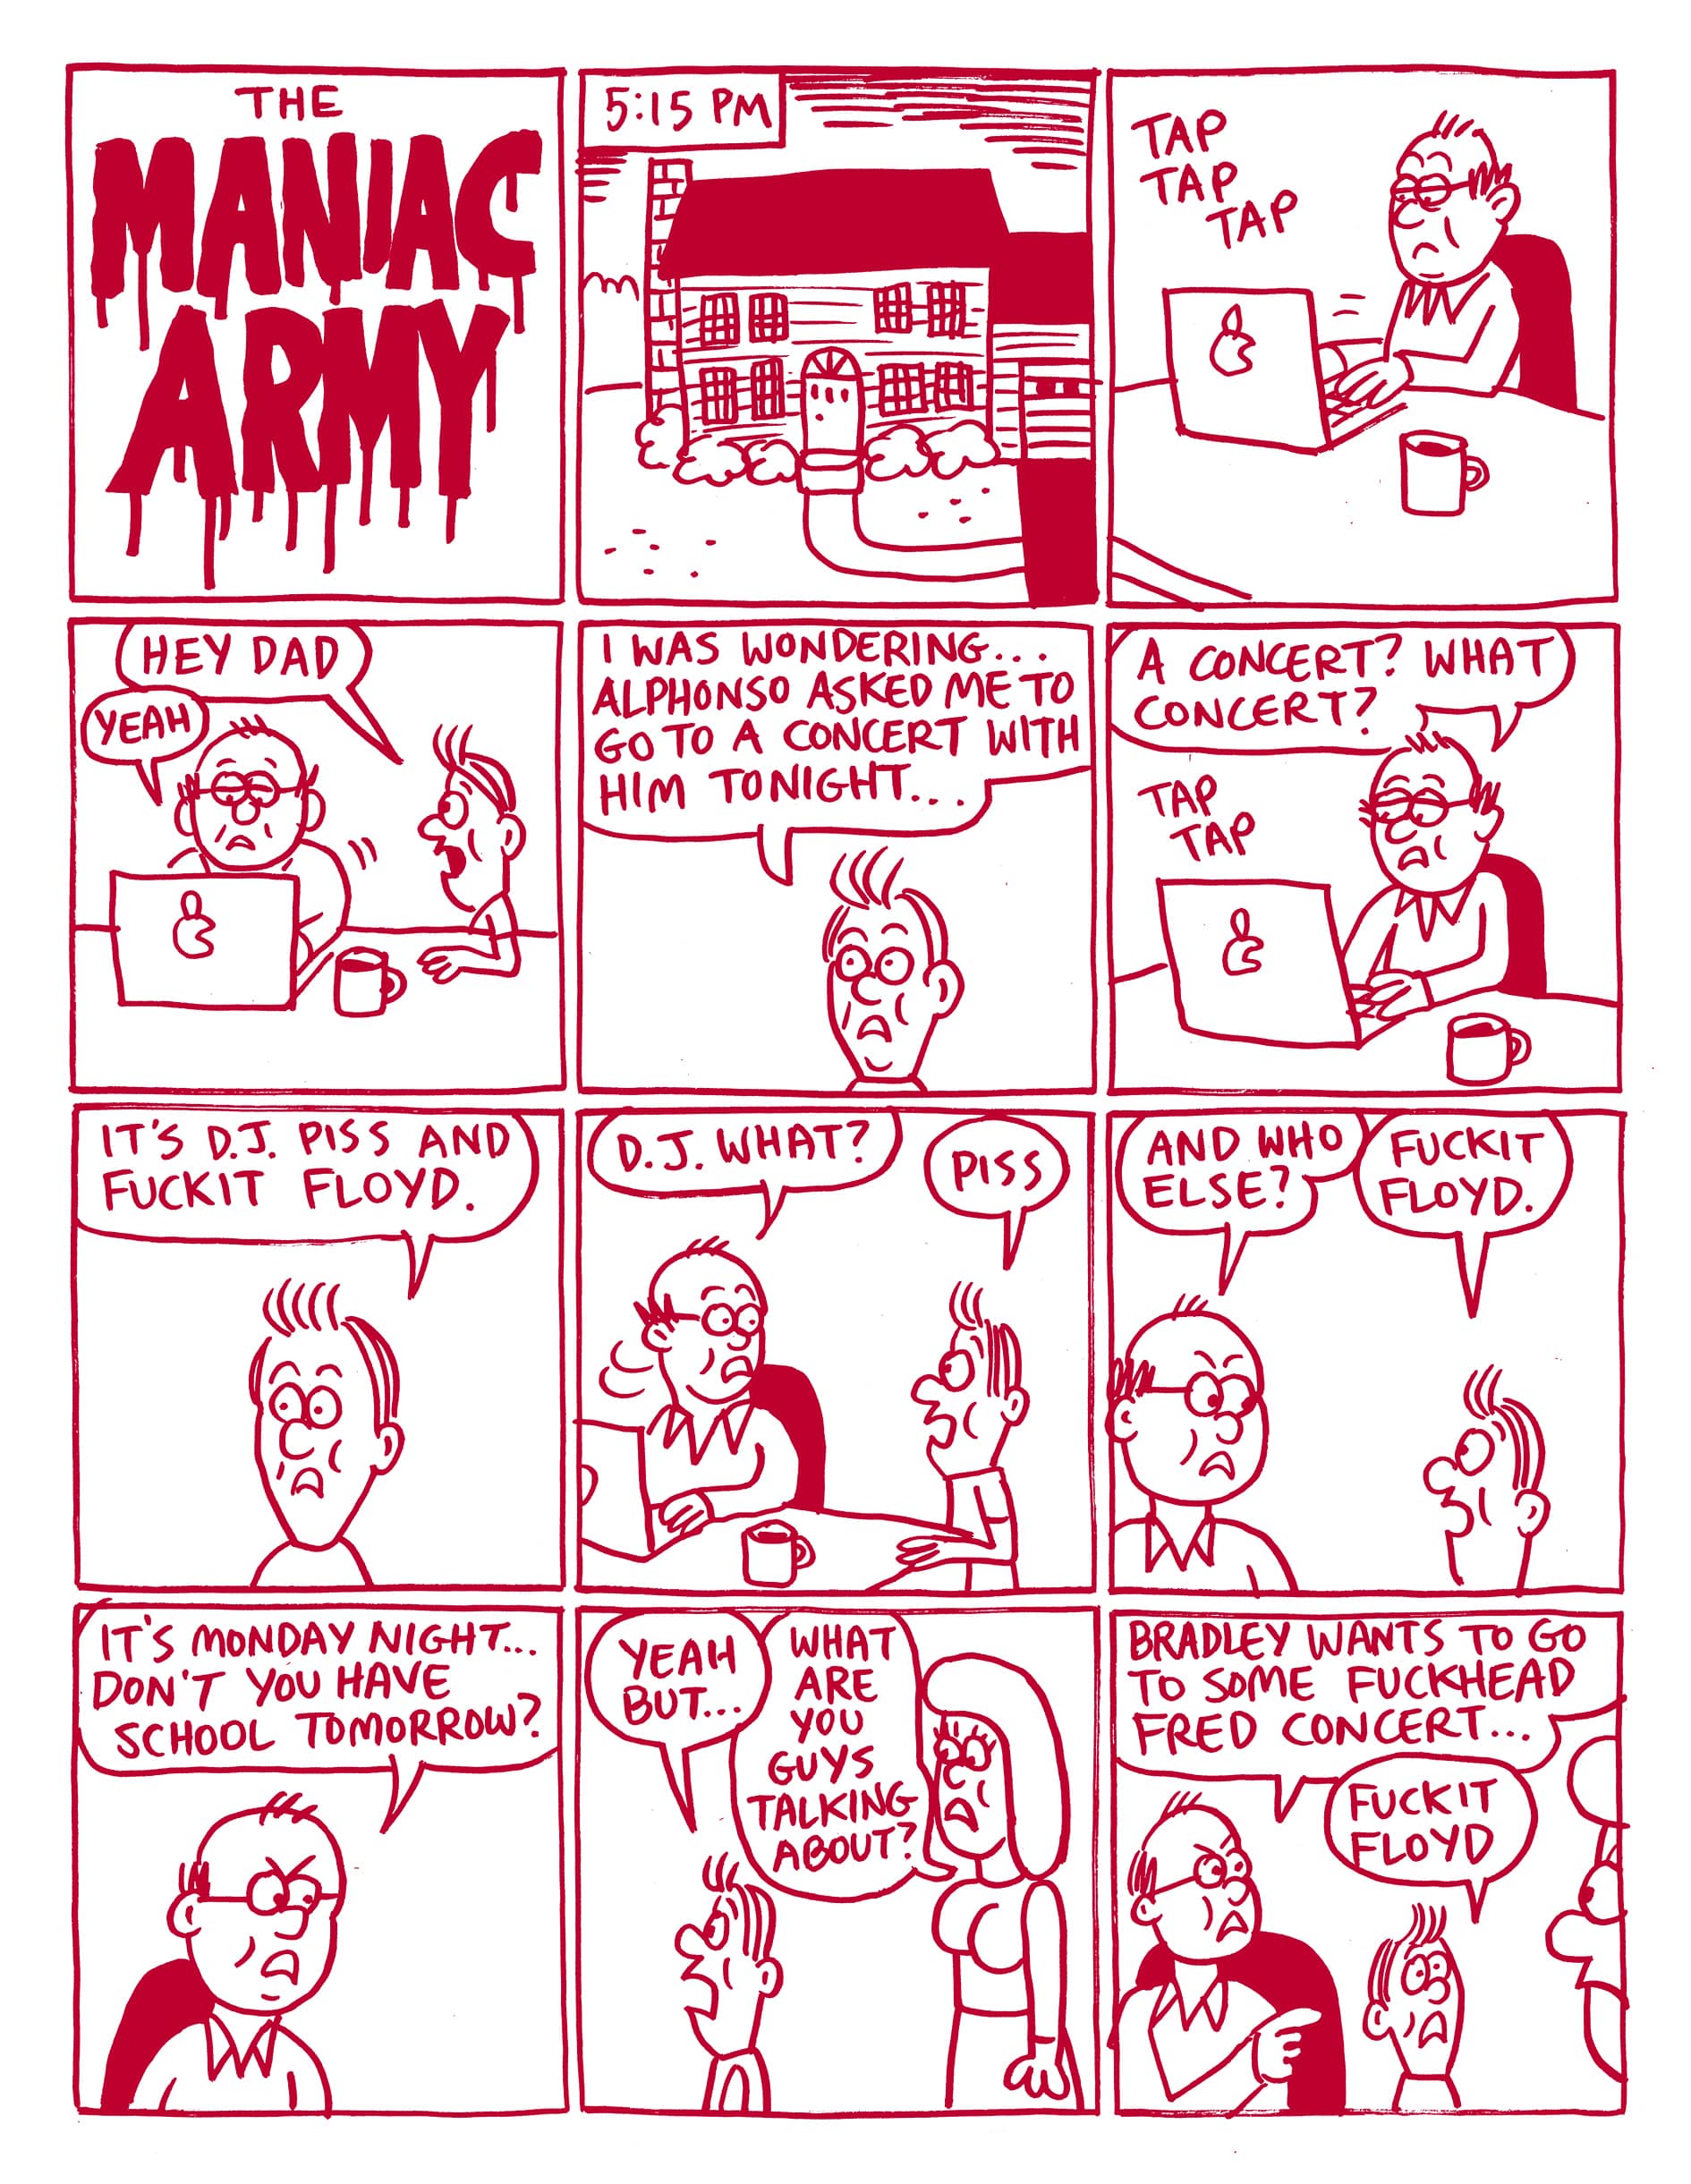 A tale of Terror issue two : MANIAC ARMY by Johnny Ryan